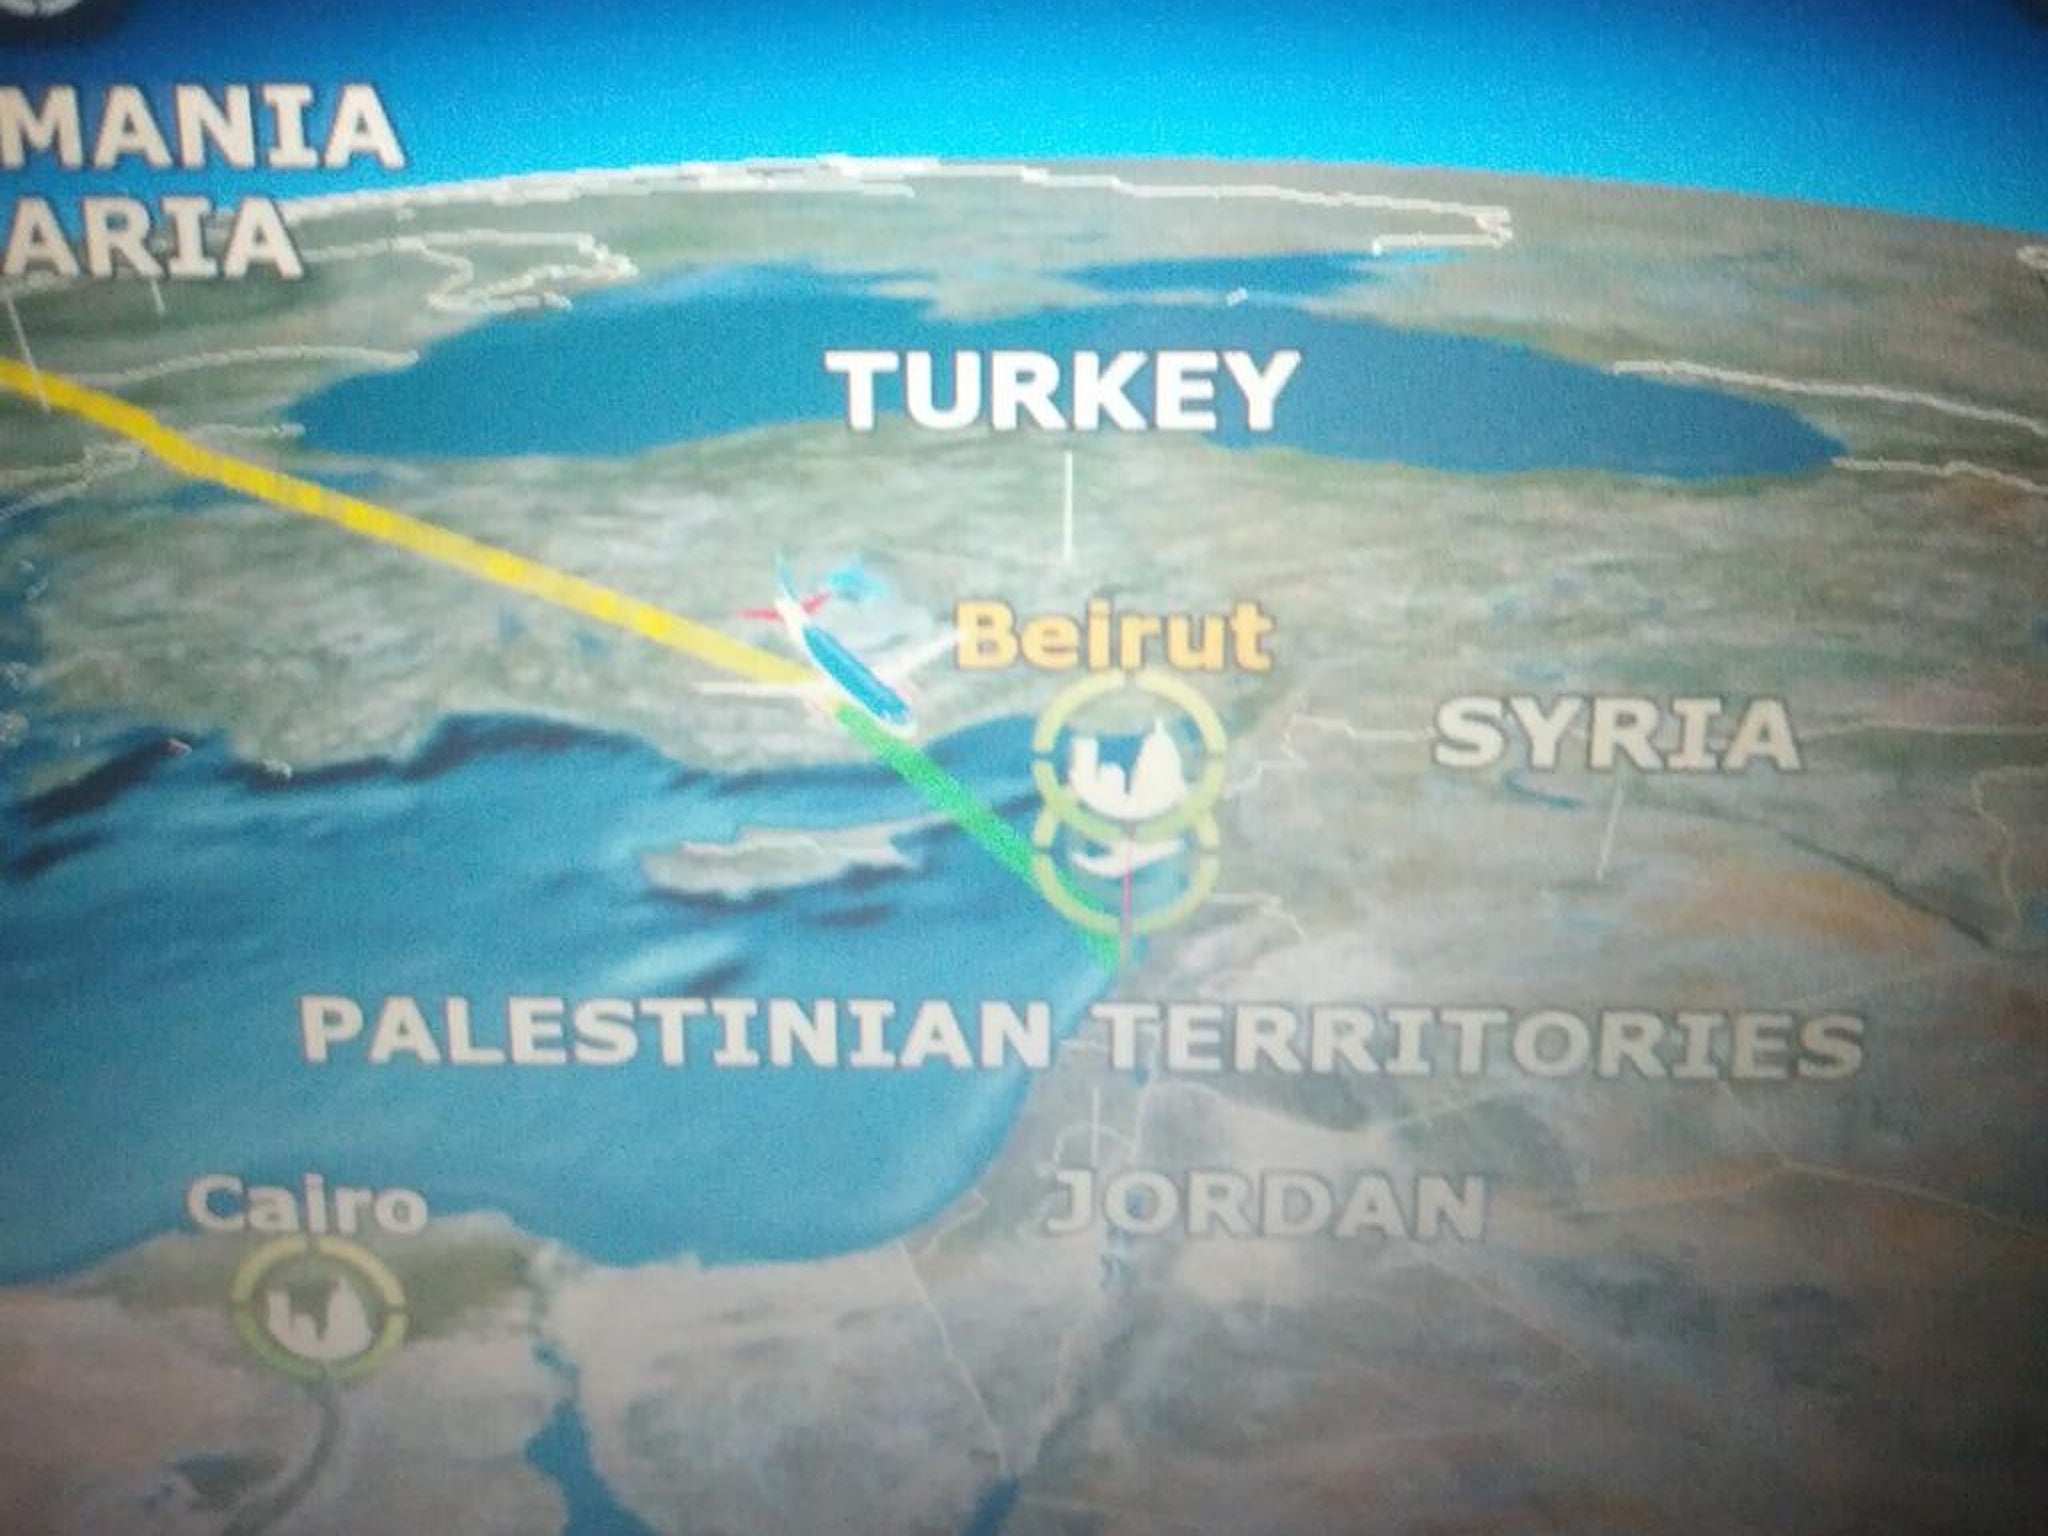 A picture of the in-flight map shown on the British Airways plane